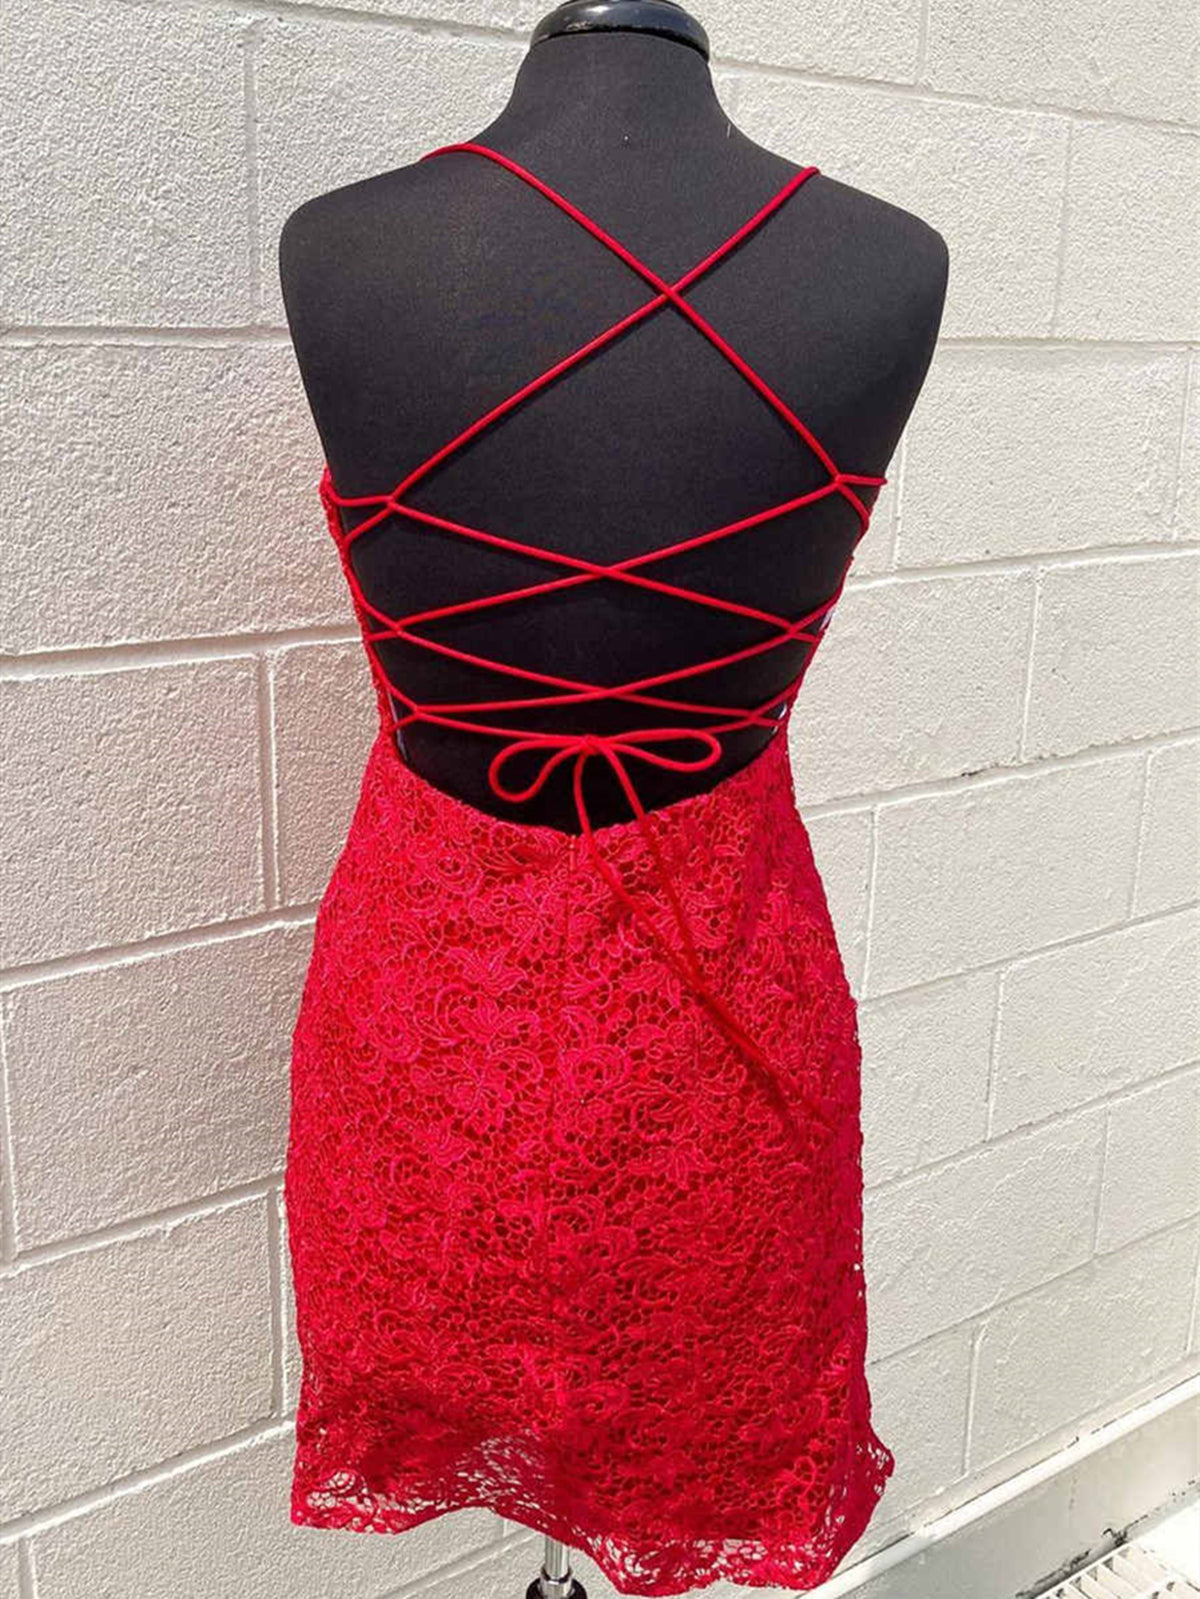 Corset Prom Dress, Short Backless Red Lace Prom Dresses, Open Back Short Red Lace Formal Homecoming Dresses